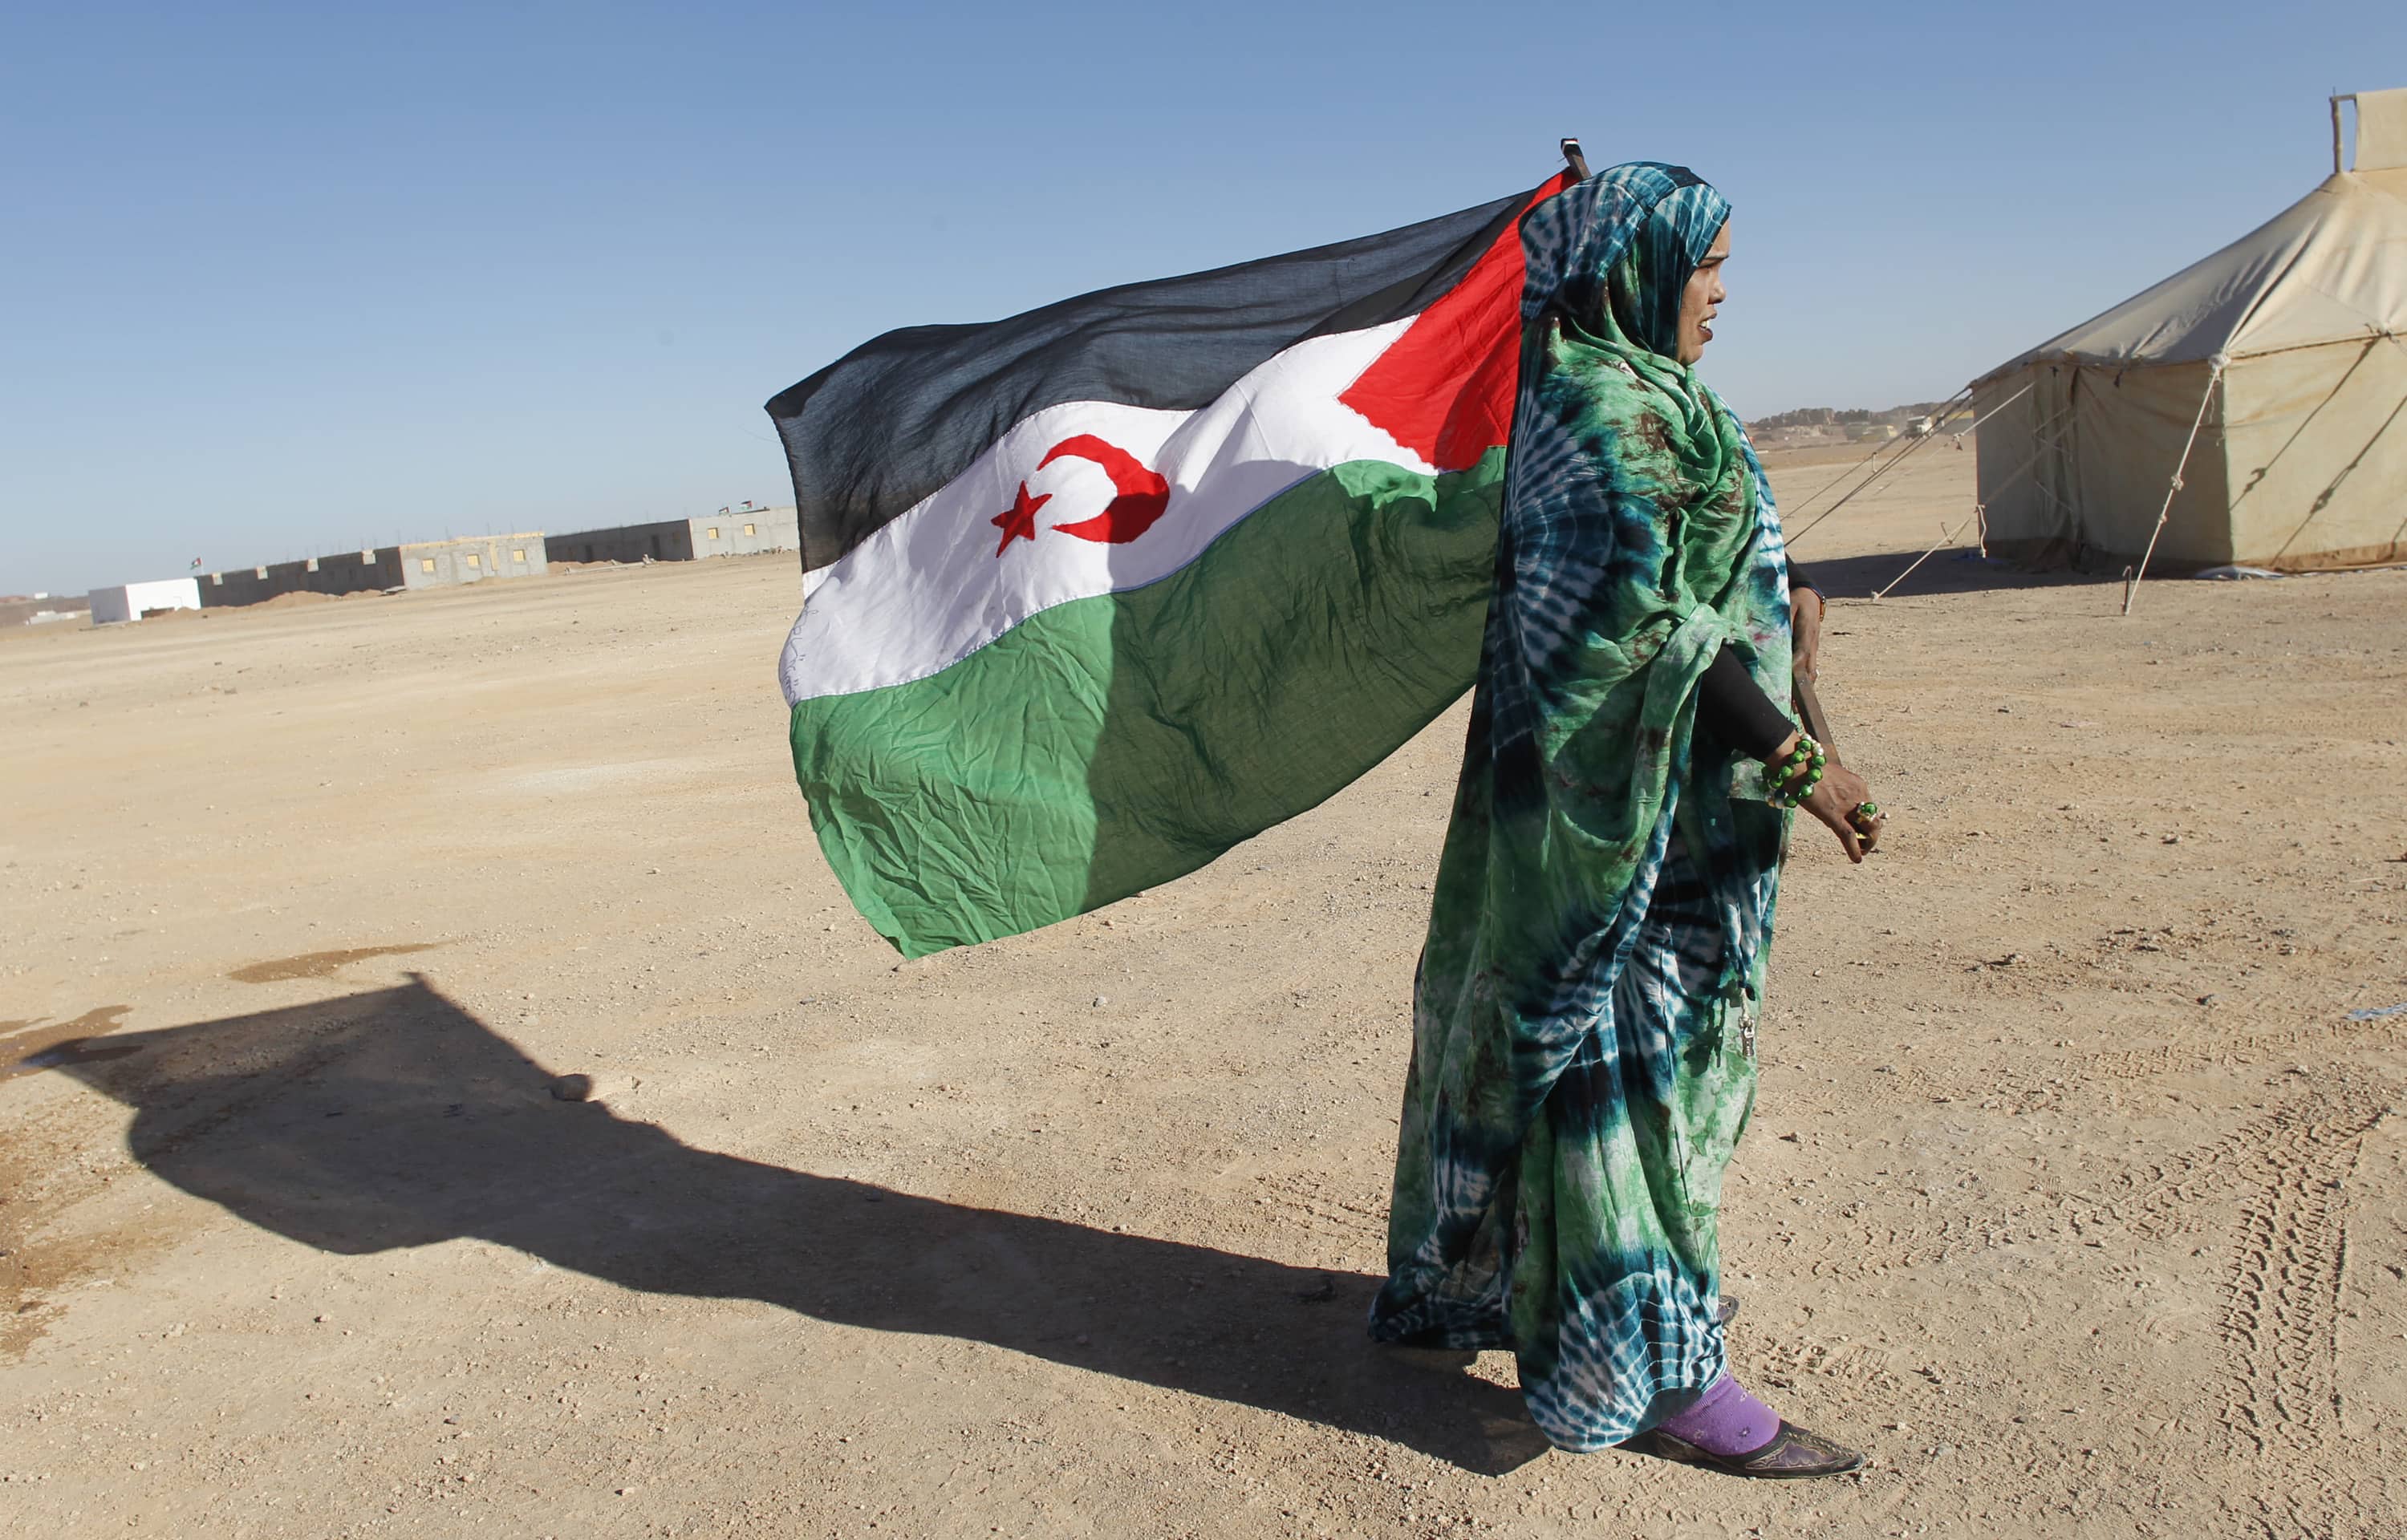 A Sahrawi woman is pictured in this 27 February 2011 photo holding her national flag in celebration of the independence movement for Western Sahara, REUTERS/Juan Medina